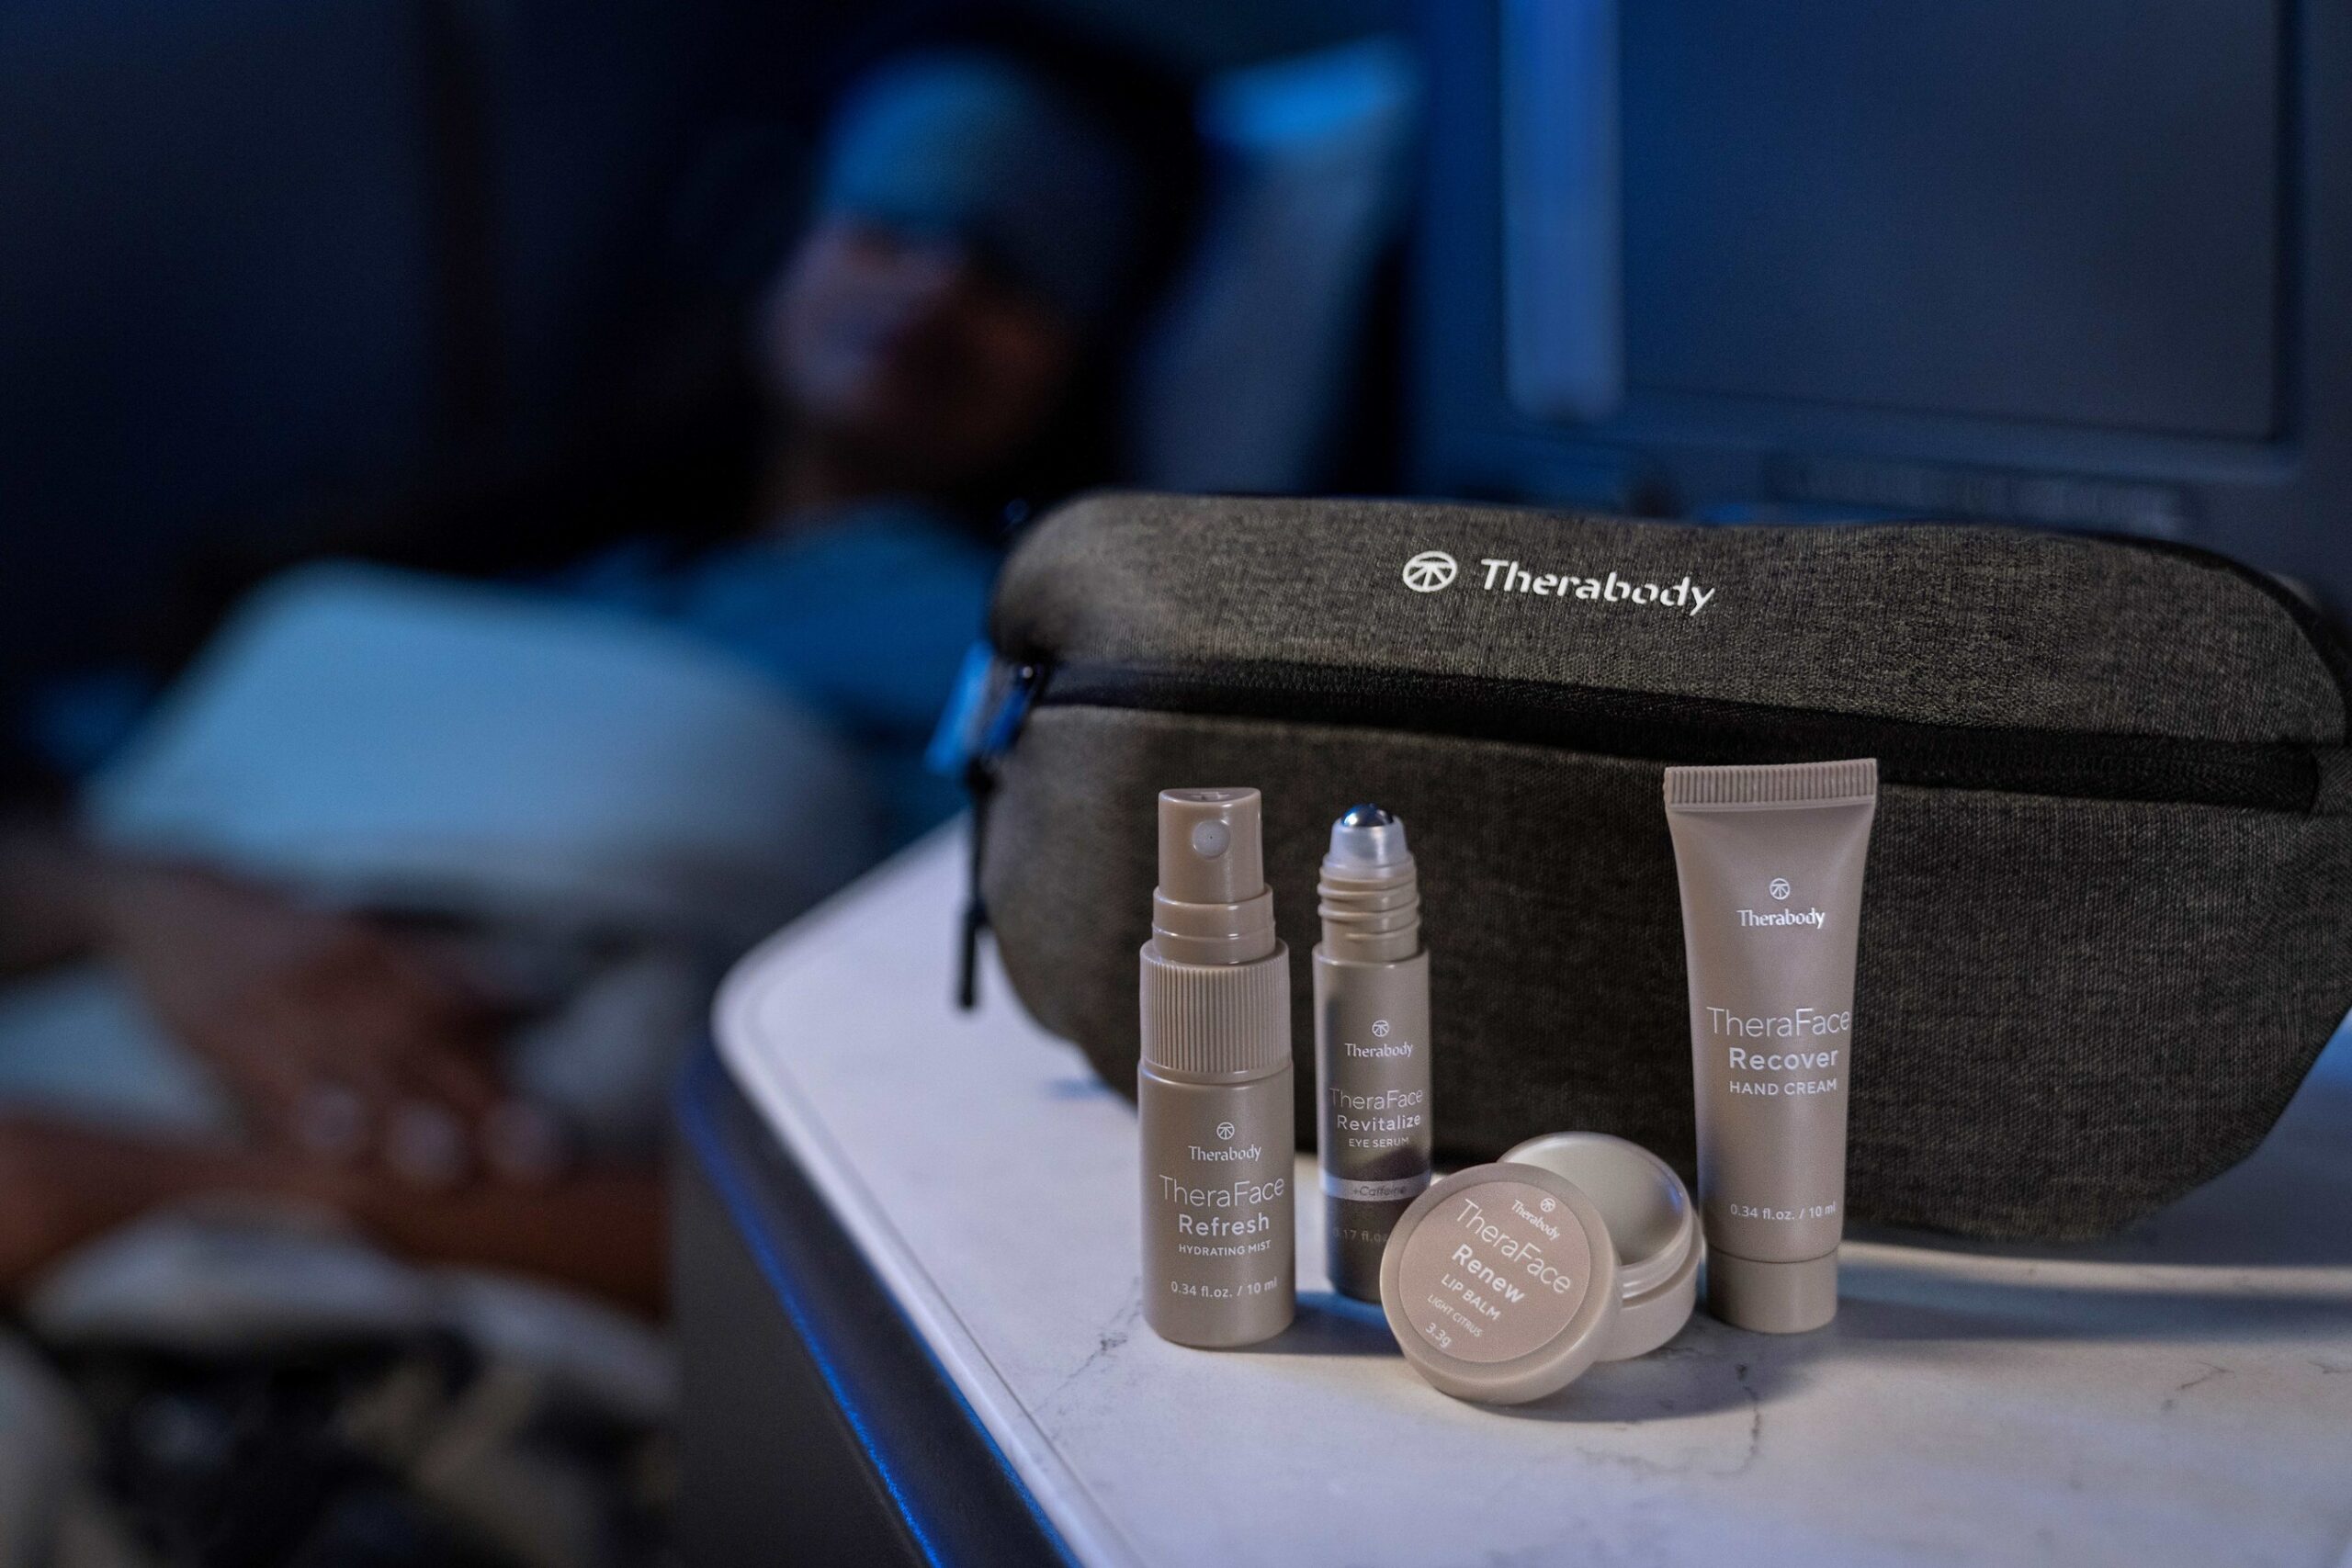 United Polaris Business Class Gets New Amenities from Therabody and Saks Fifth Avenue